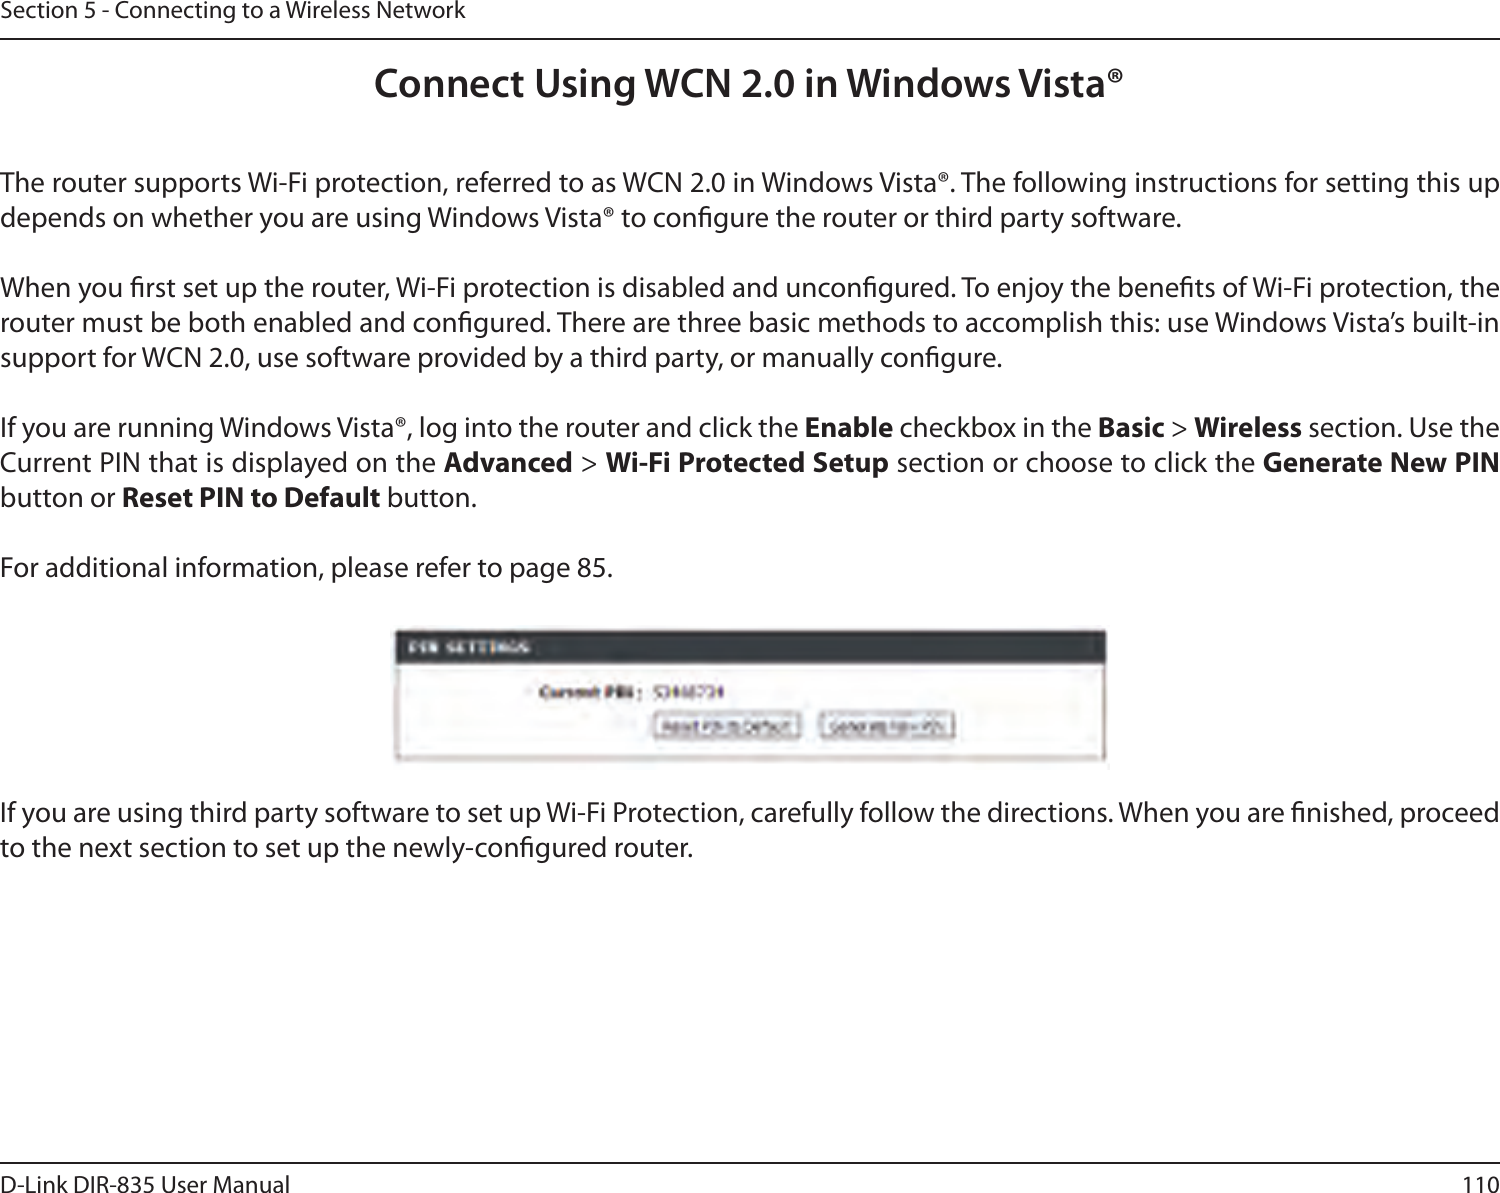 110D-Link DIR-835 User ManualSection 5 - Connecting to a Wireless NetworkConnect Using WCN 2.0 in Windows Vista® The router supports Wi-Fi protection, referred to as WCN 2.0 in Windows Vista®. The following instructions for setting this up depends on whether you are using Windows Vista® to congure the router or third party software.        When you rst set up the router, Wi-Fi protection is disabled and uncongured. To enjoy the benets of Wi-Fi protection, the router must be both enabled and congured. There are three basic methods to accomplish this: use Windows Vista’s built-in support for WCN 2.0, use software provided by a third party, or manually congure. If you are running Windows Vista®, log into the router and click the Enable checkbox in the Basic &gt; Wireless section. Use the Current PIN that is displayed on the Advanced &gt; Wi-Fi Protected Setup section or choose to click the Generate New PIN button or Reset PIN to Default button. For additional information, please refer to page 85.If you are using third party software to set up Wi-Fi Protection, carefully follow the directions. When you are nished, proceed to the next section to set up the newly-congured router. 